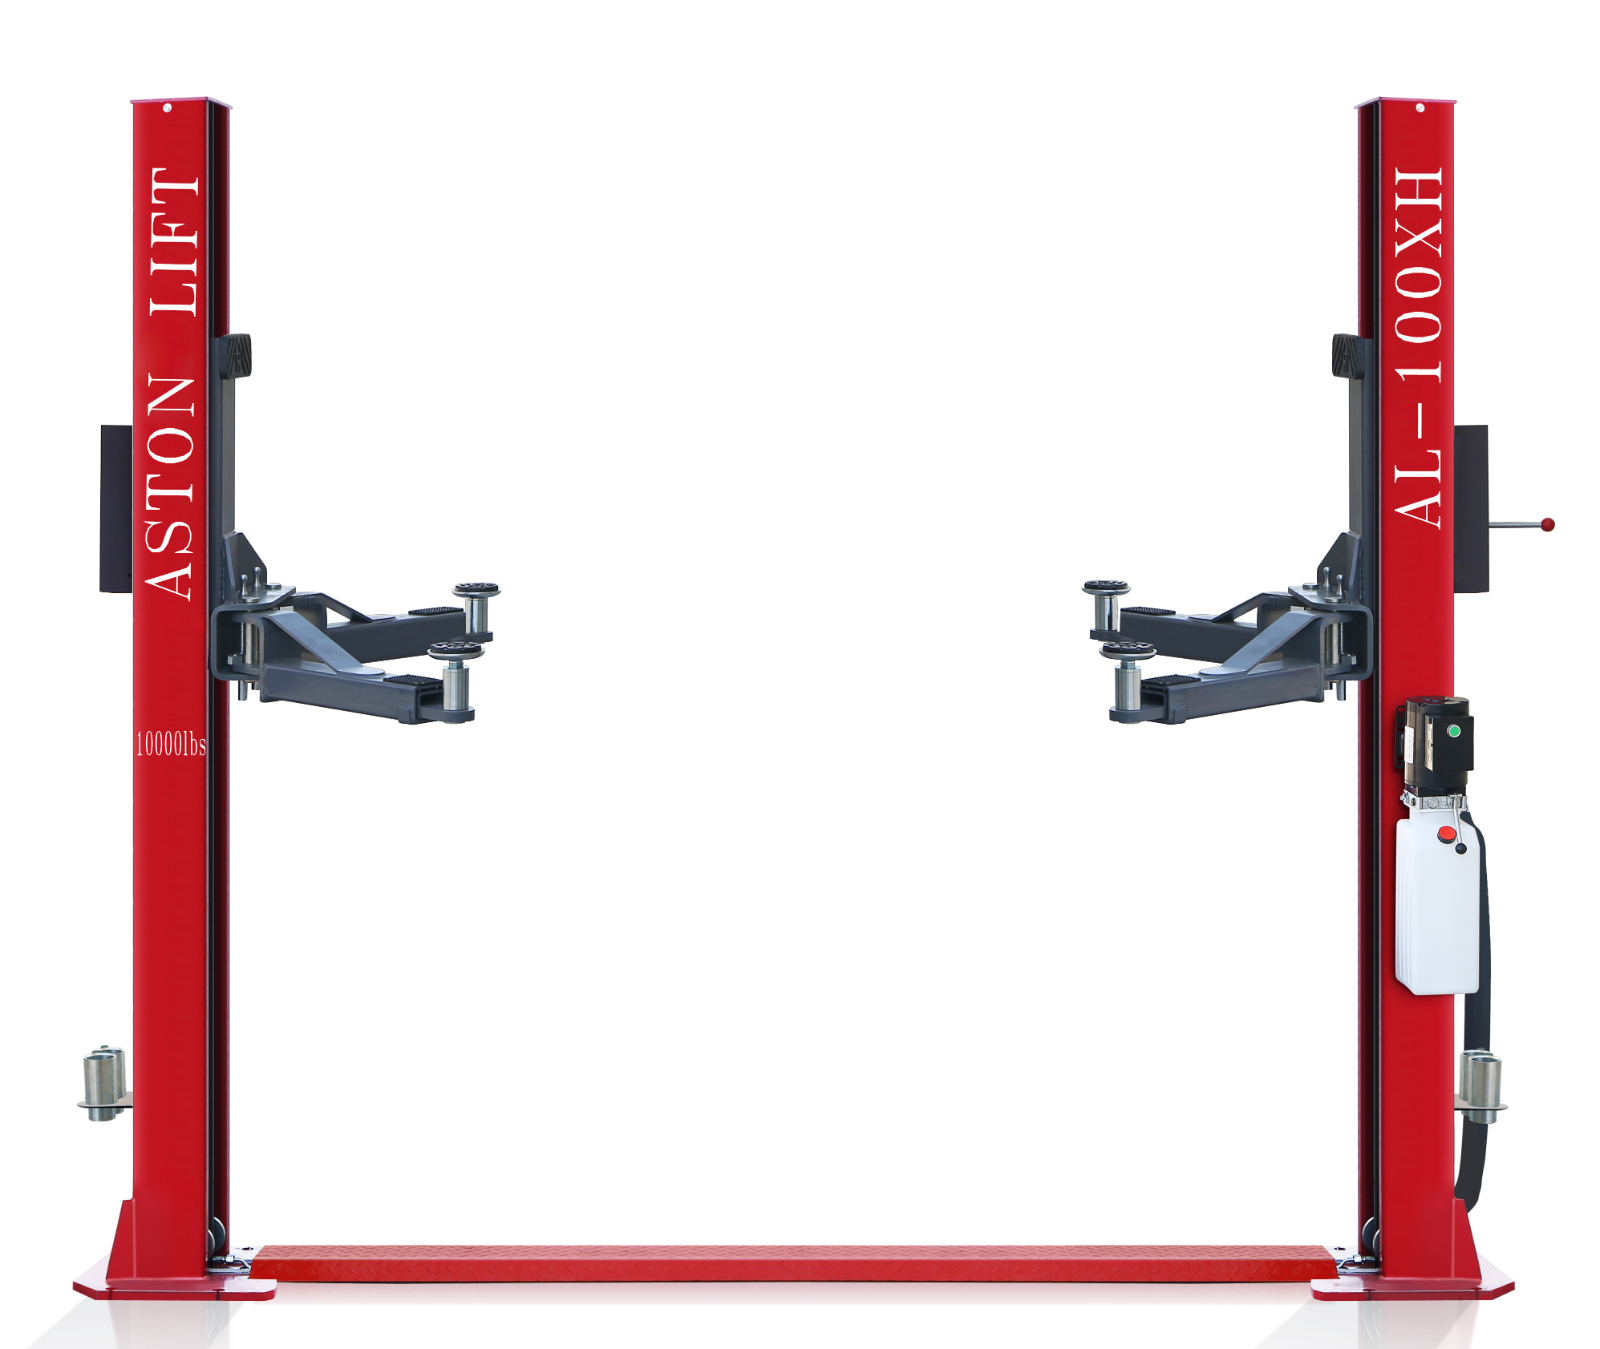 Aston 10,000lbs 2 post car lift two post auto lift ***SINGLE POINT LOCK RELEASE